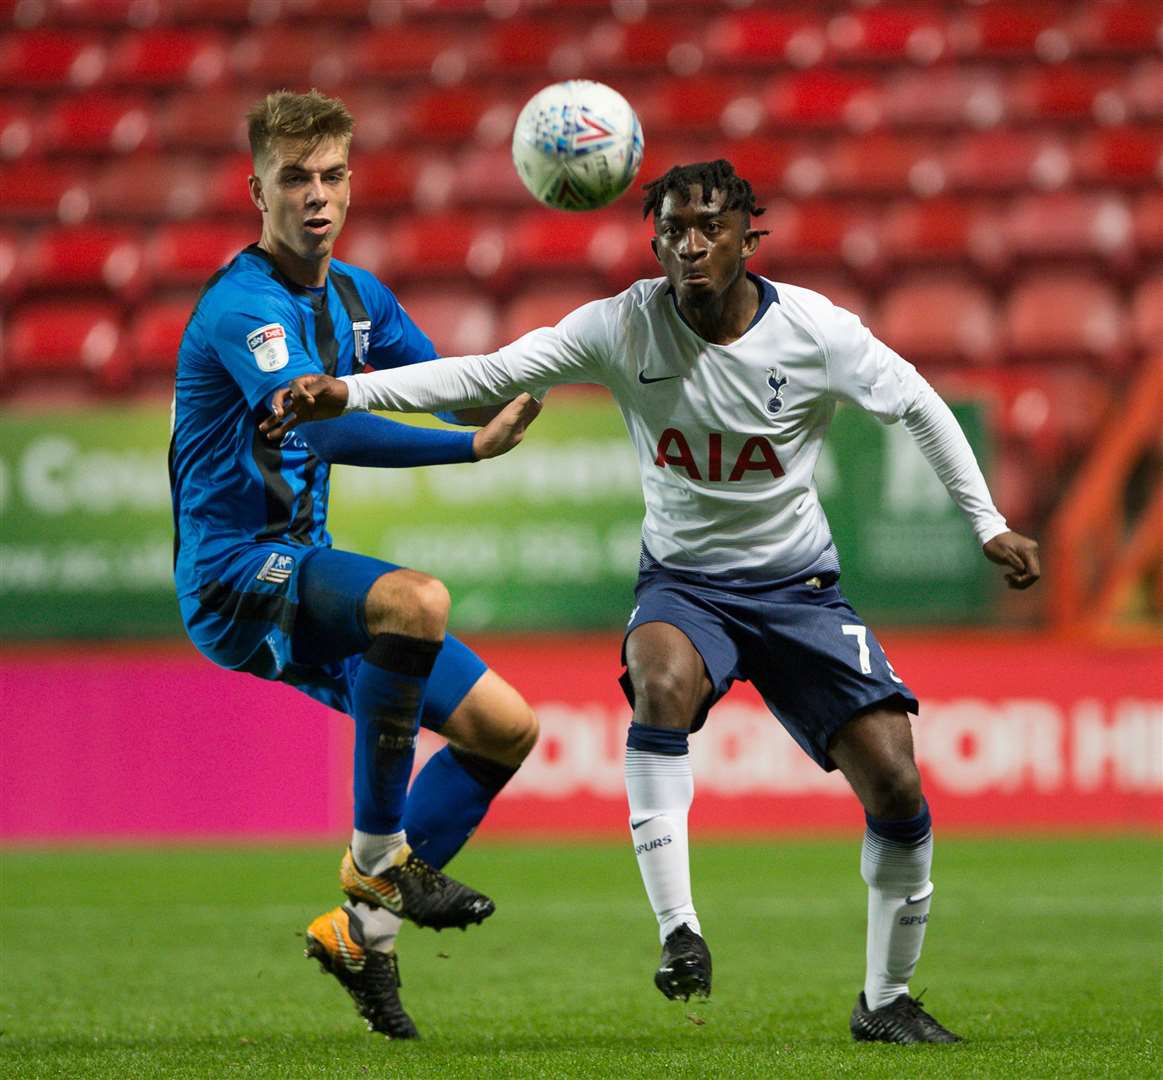 Jack Tucker challenges with Tottenham's Rodel Richards last season in the EFL Trophy Picture: Ady Kerry